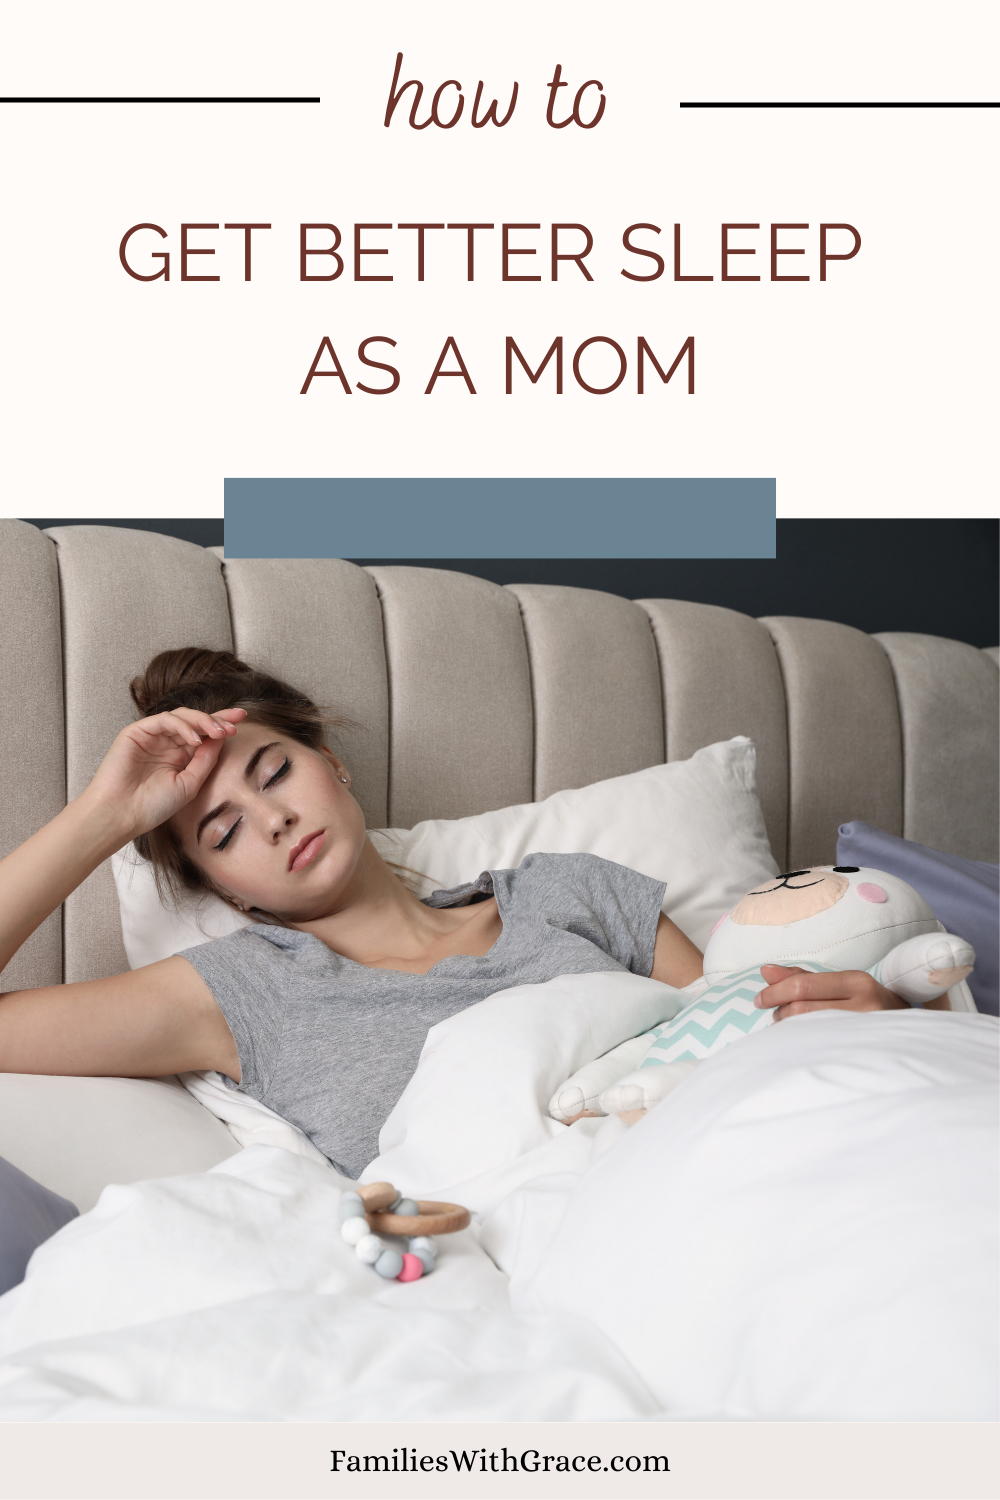 How to get better sleep for moms